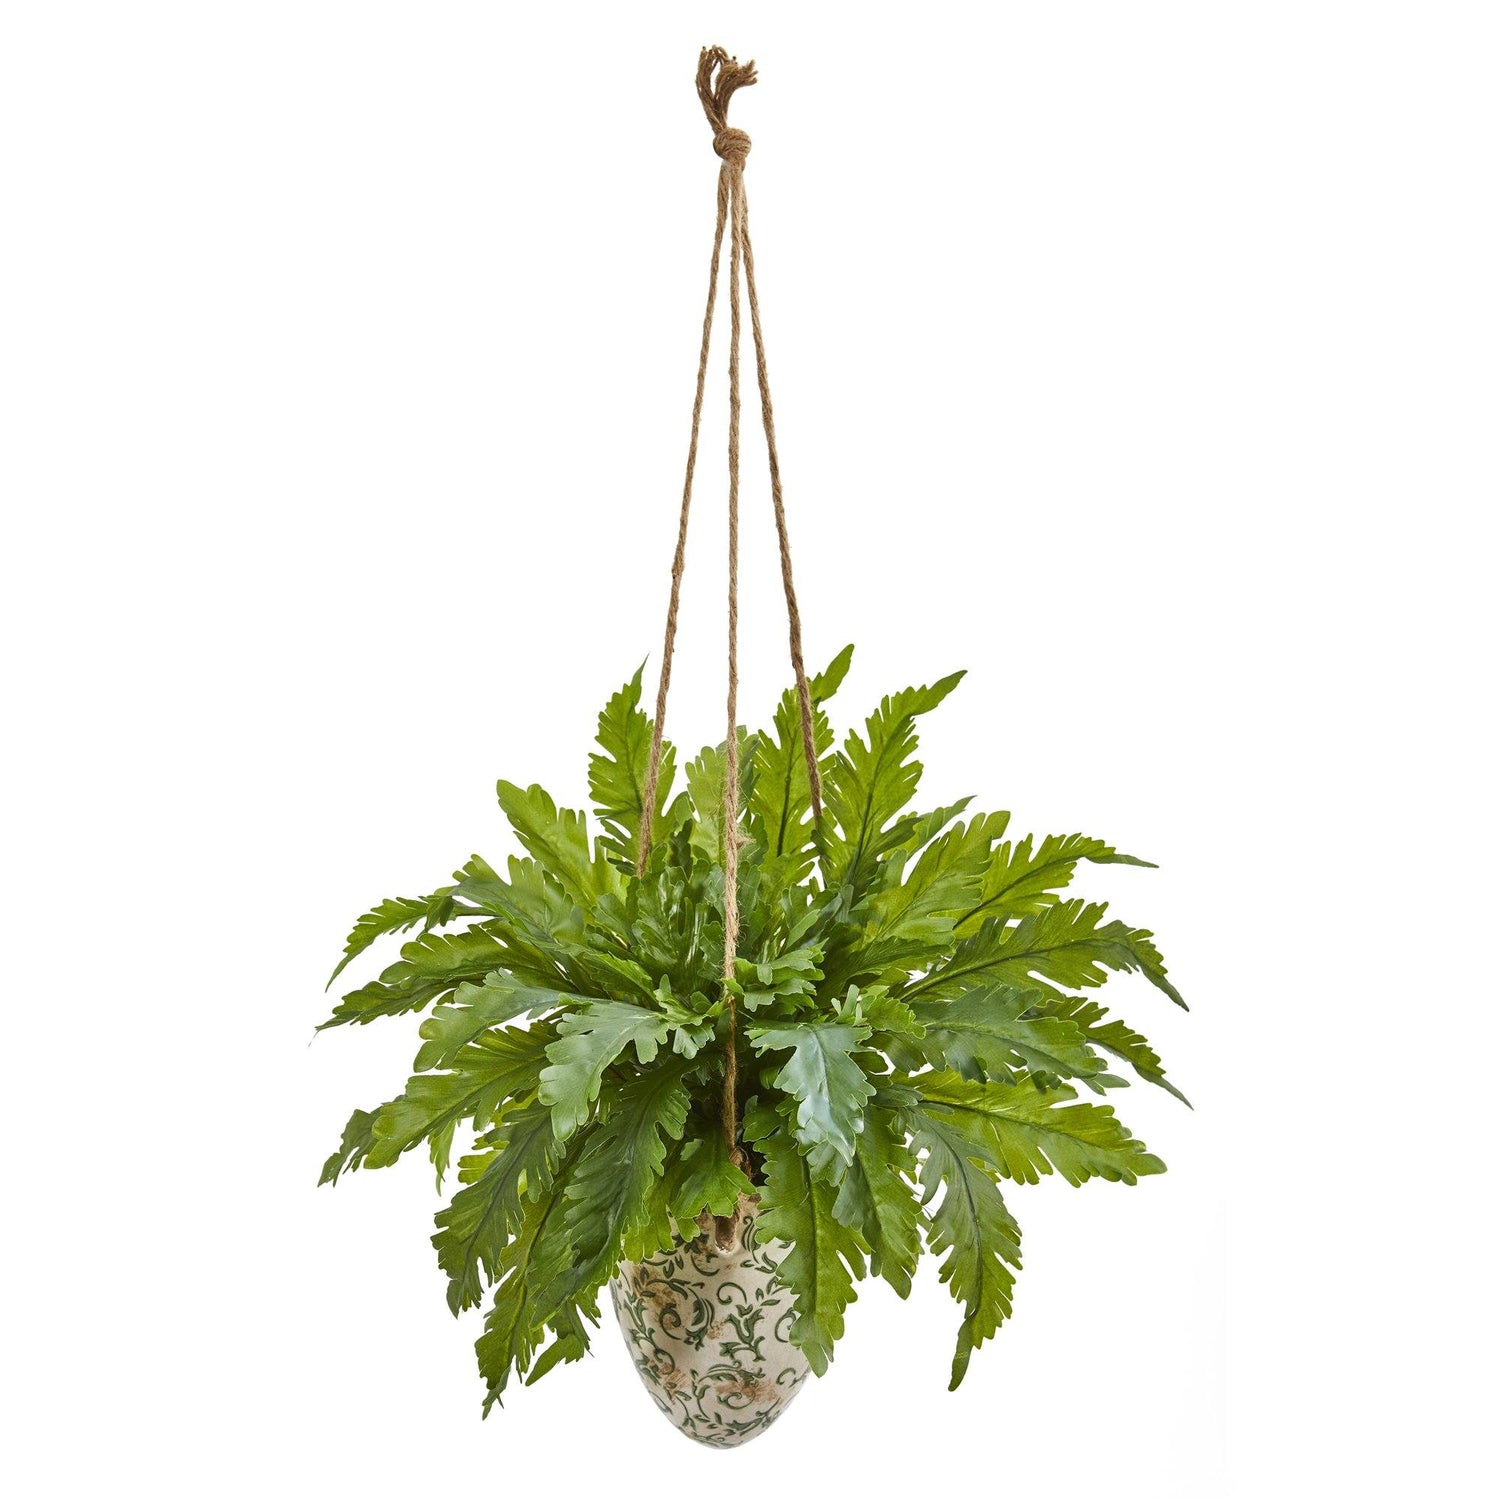 29” Fern Artificial Plant in Hanging Vase